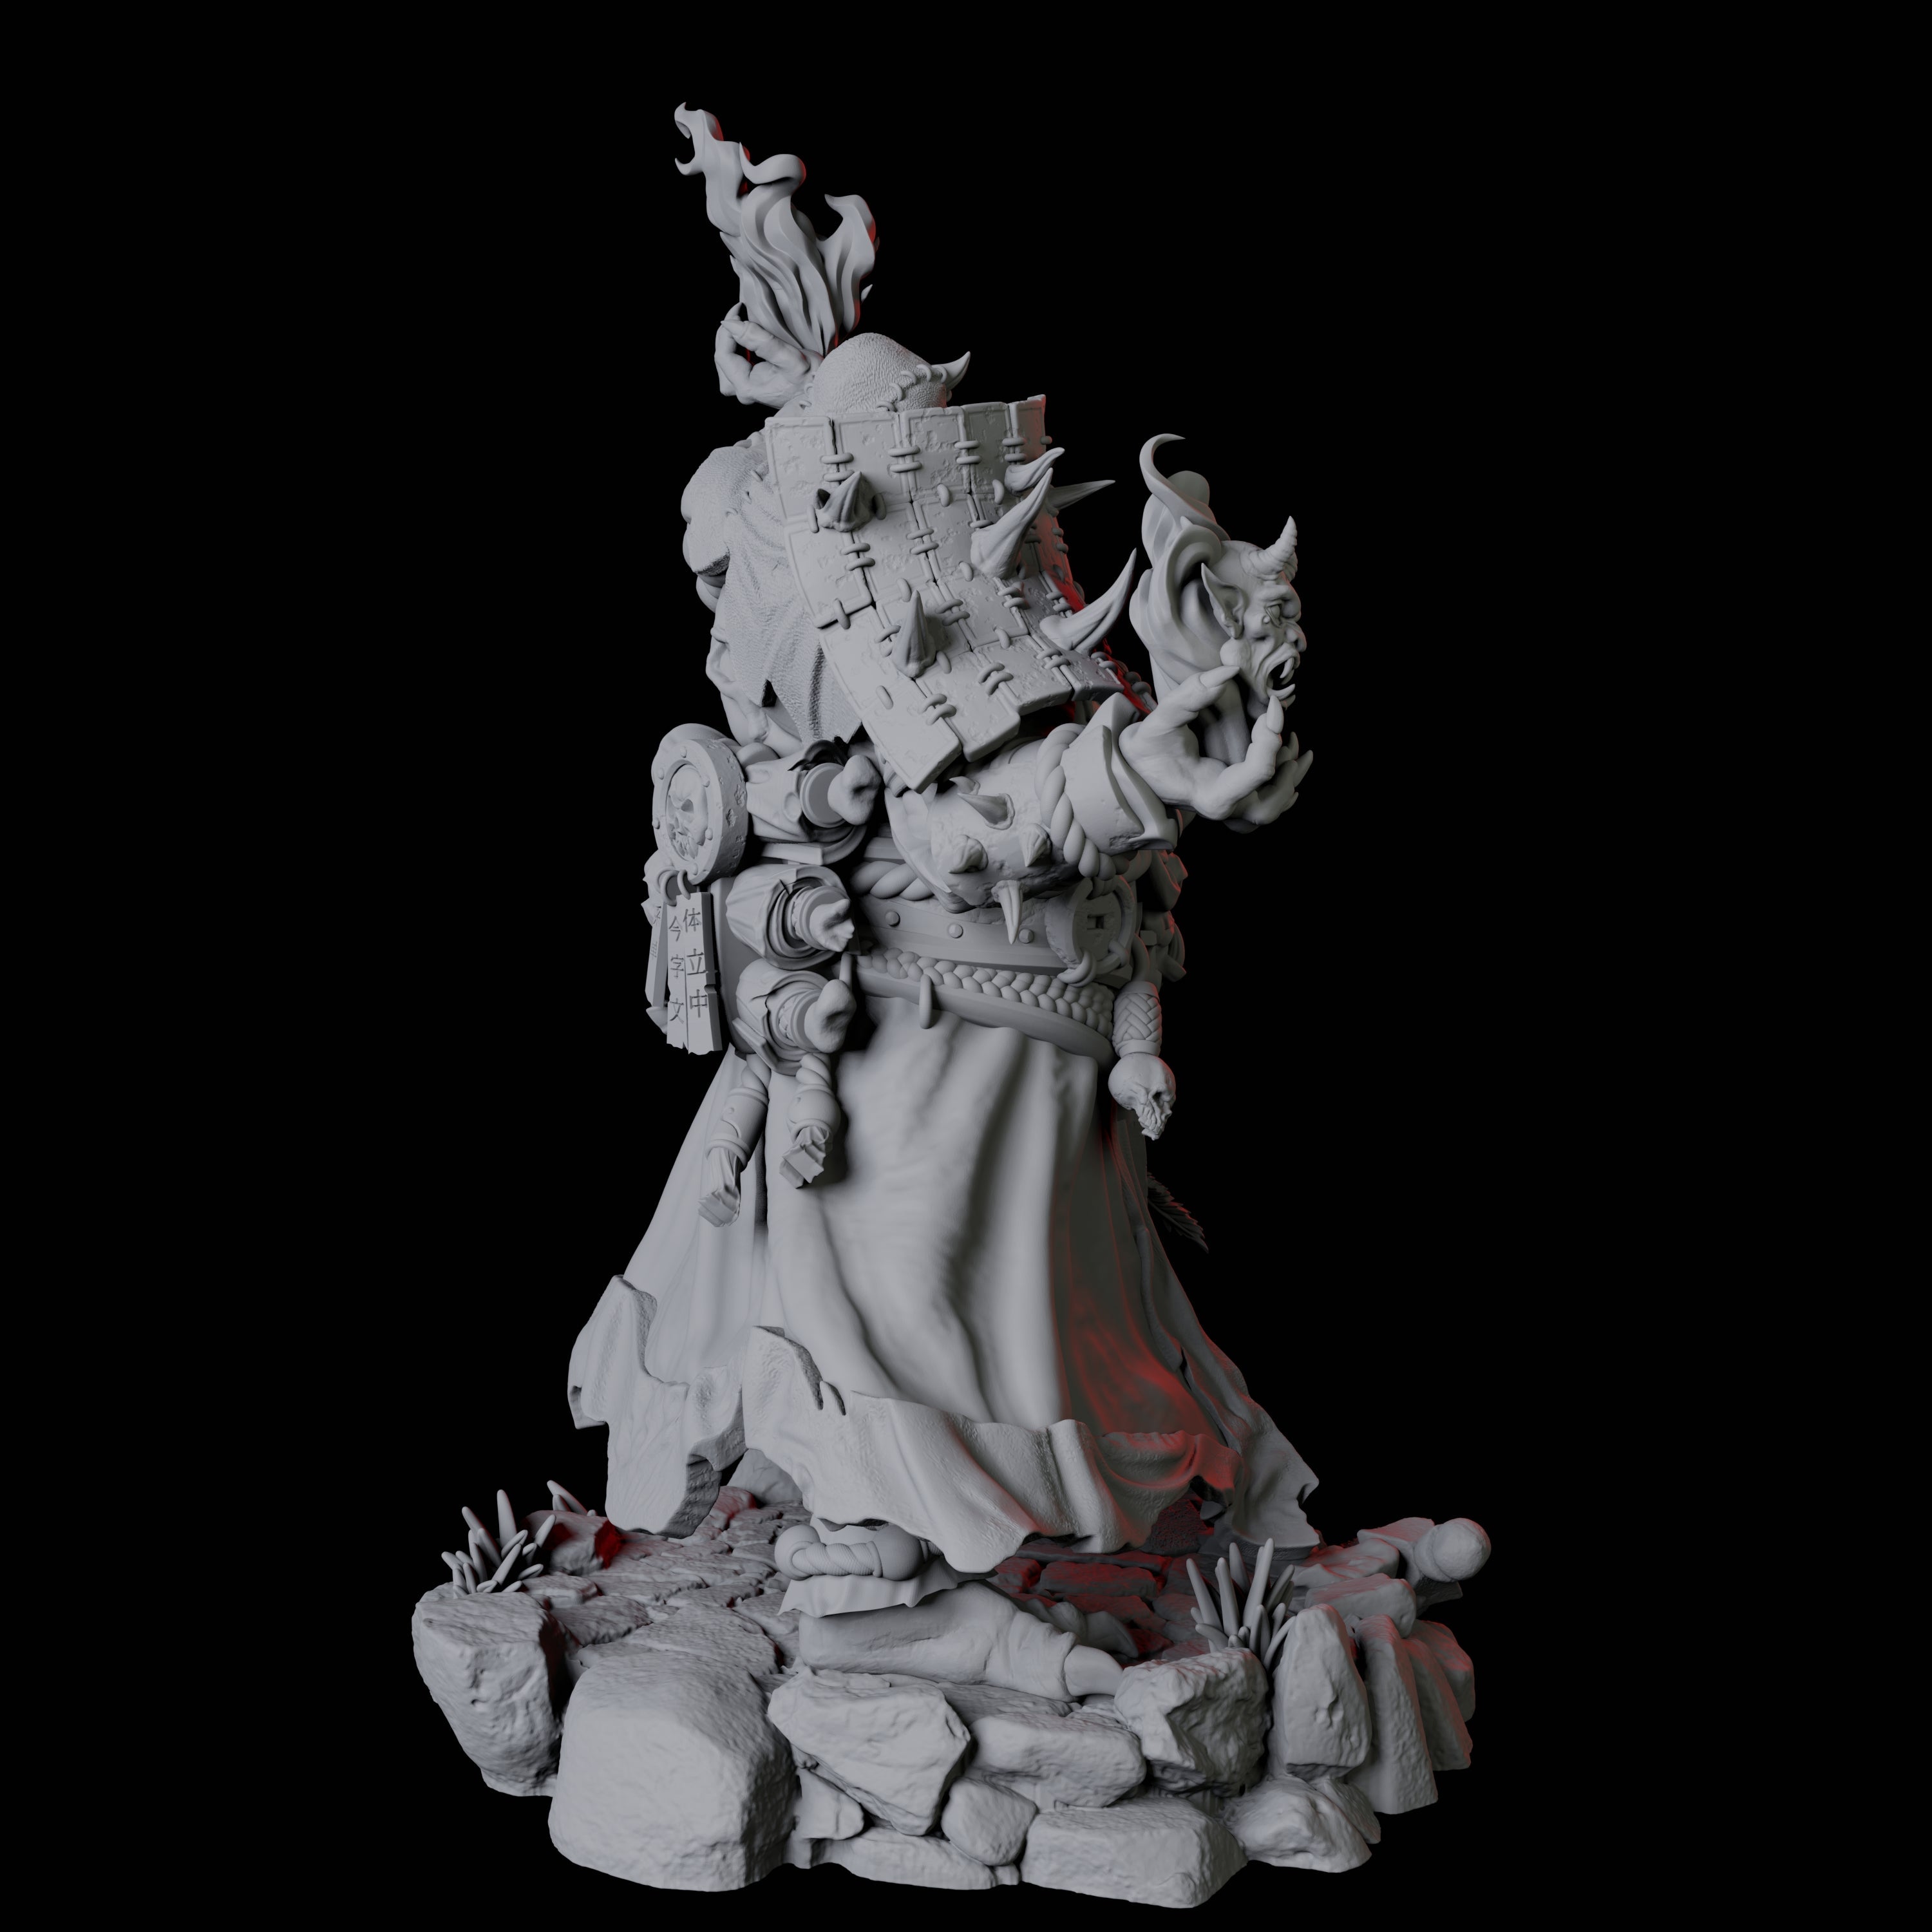 Four Towering Oni Demons Miniature for Dungeons and Dragons, Pathfinder or other TTRPGs